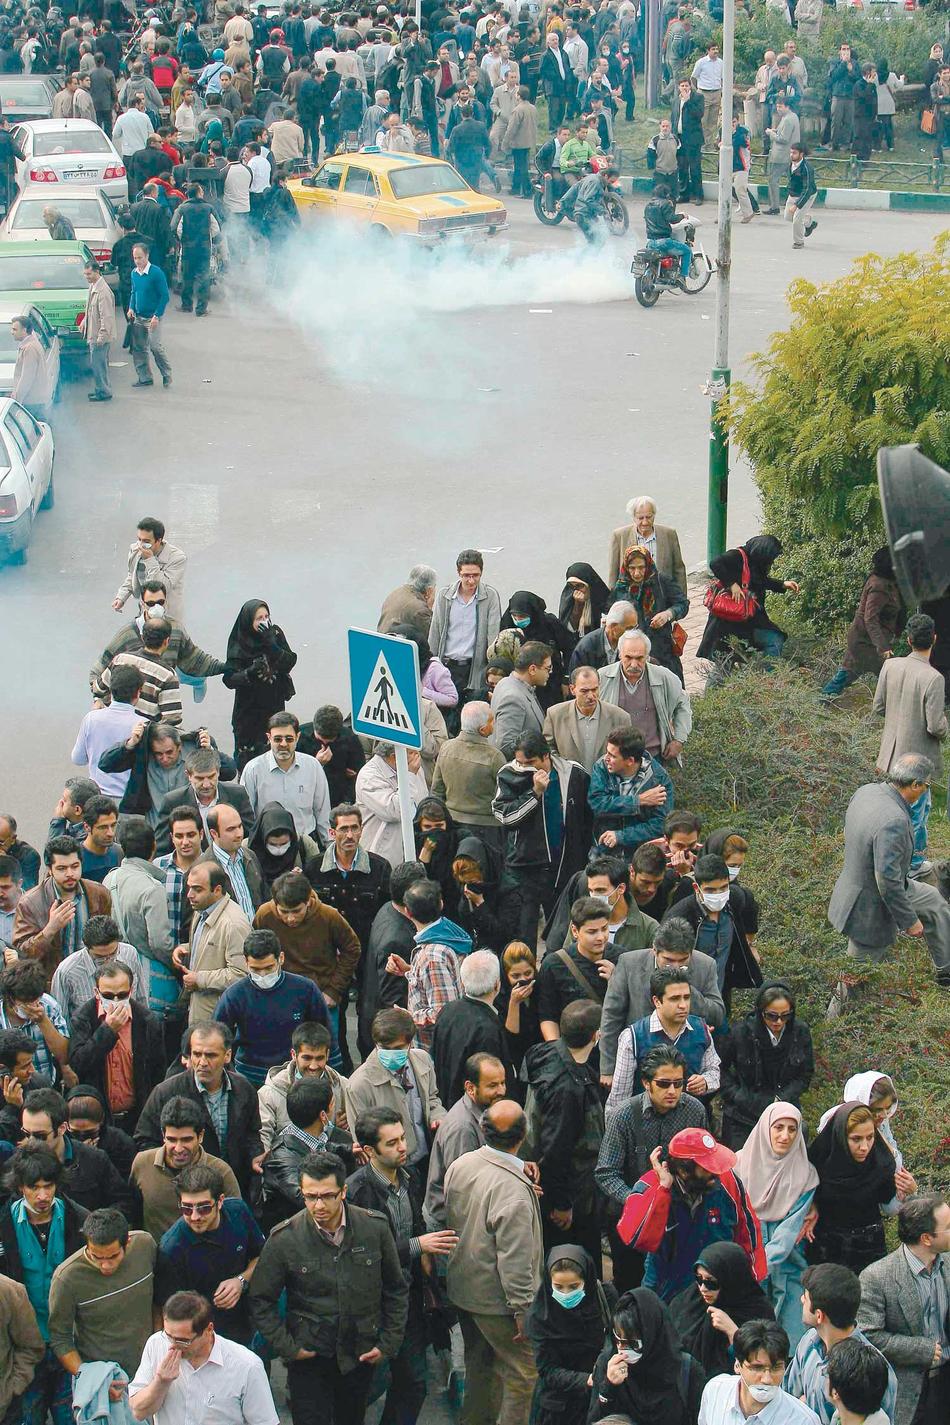 Government and opposition demonstrators took to the streets of Tehran on November 4, 2009, the 30th anniversary of the takeover of the U.S. embassy